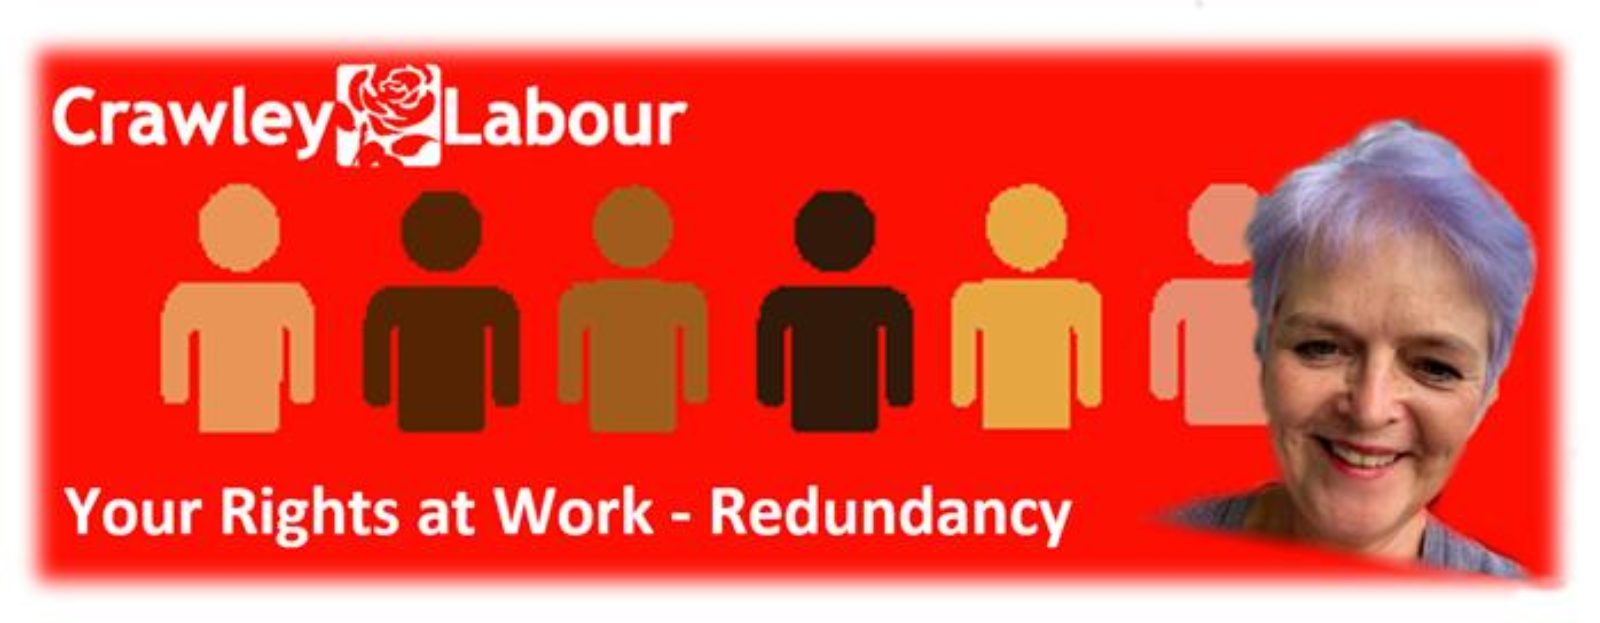 Your rights at work - Redundancy